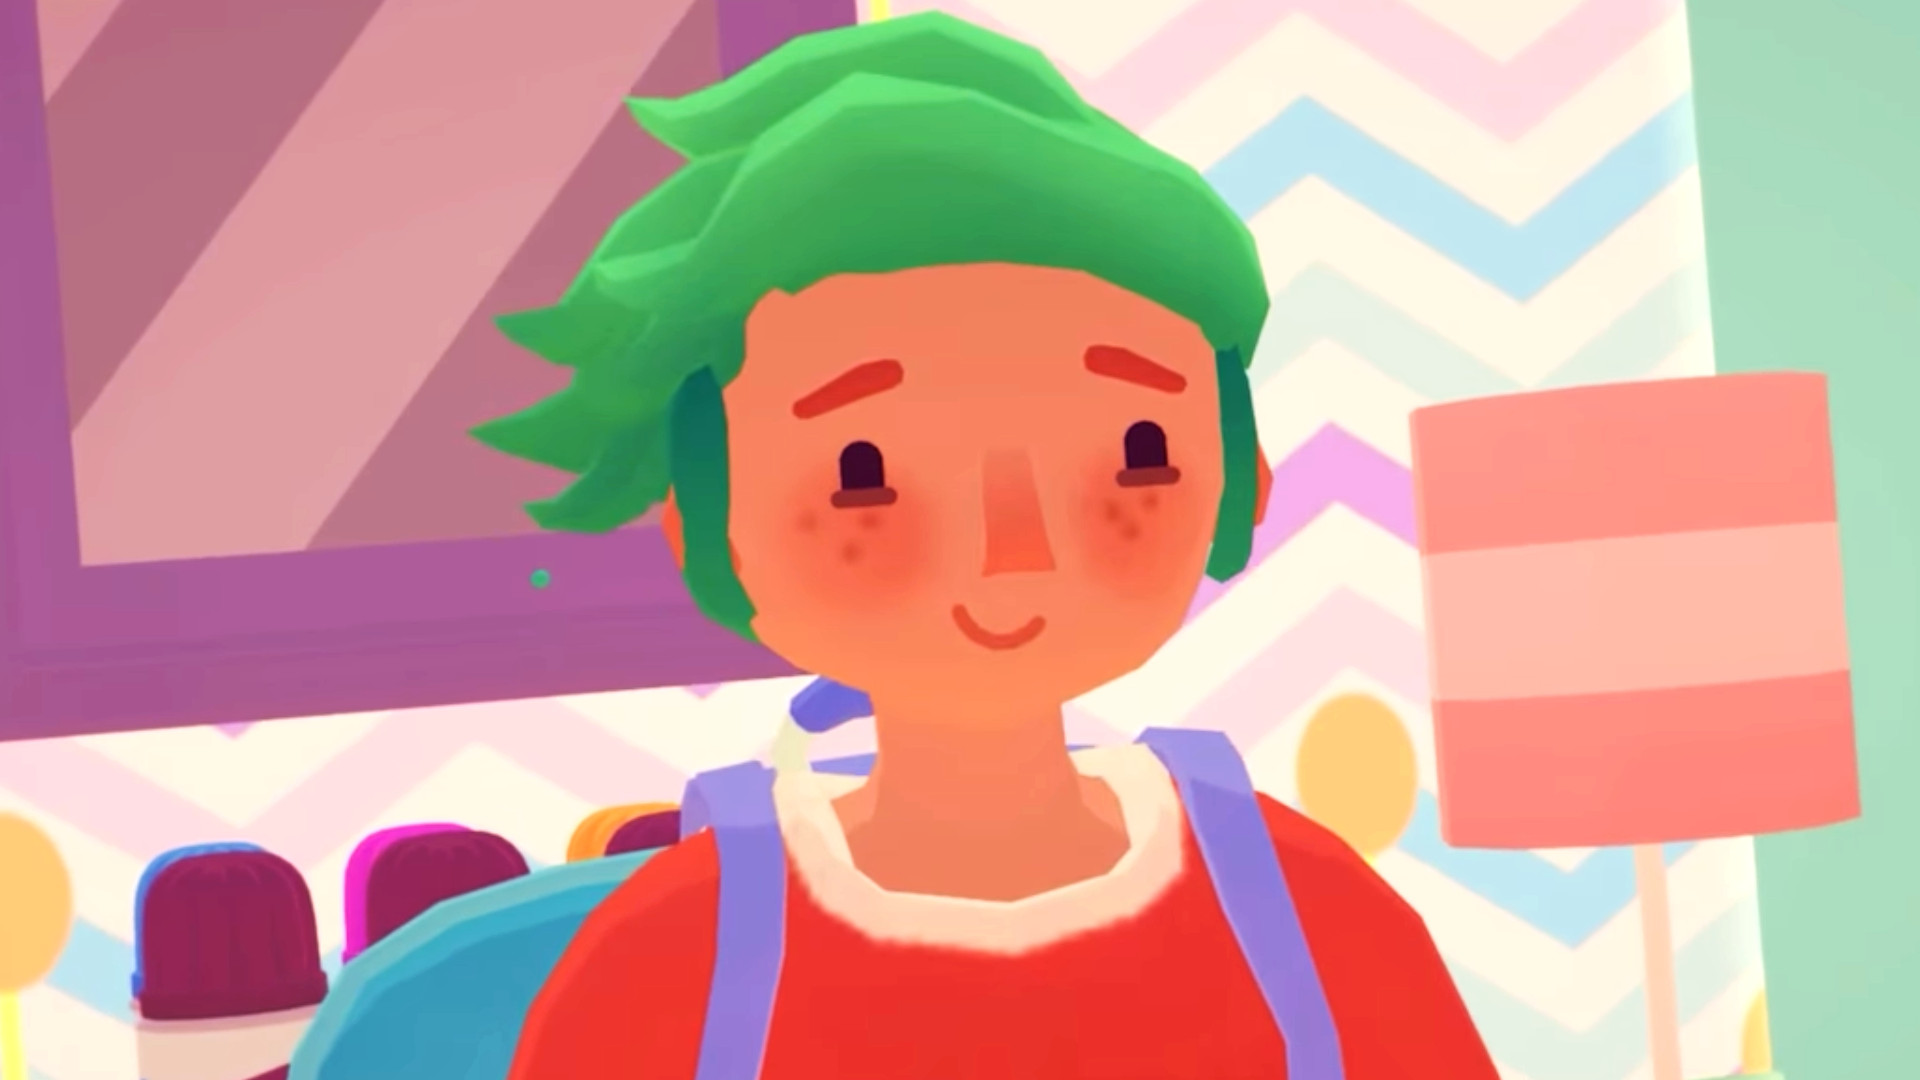 Ooblets Devs Threatened after Epic Games Store Deal - Rooster Teeth